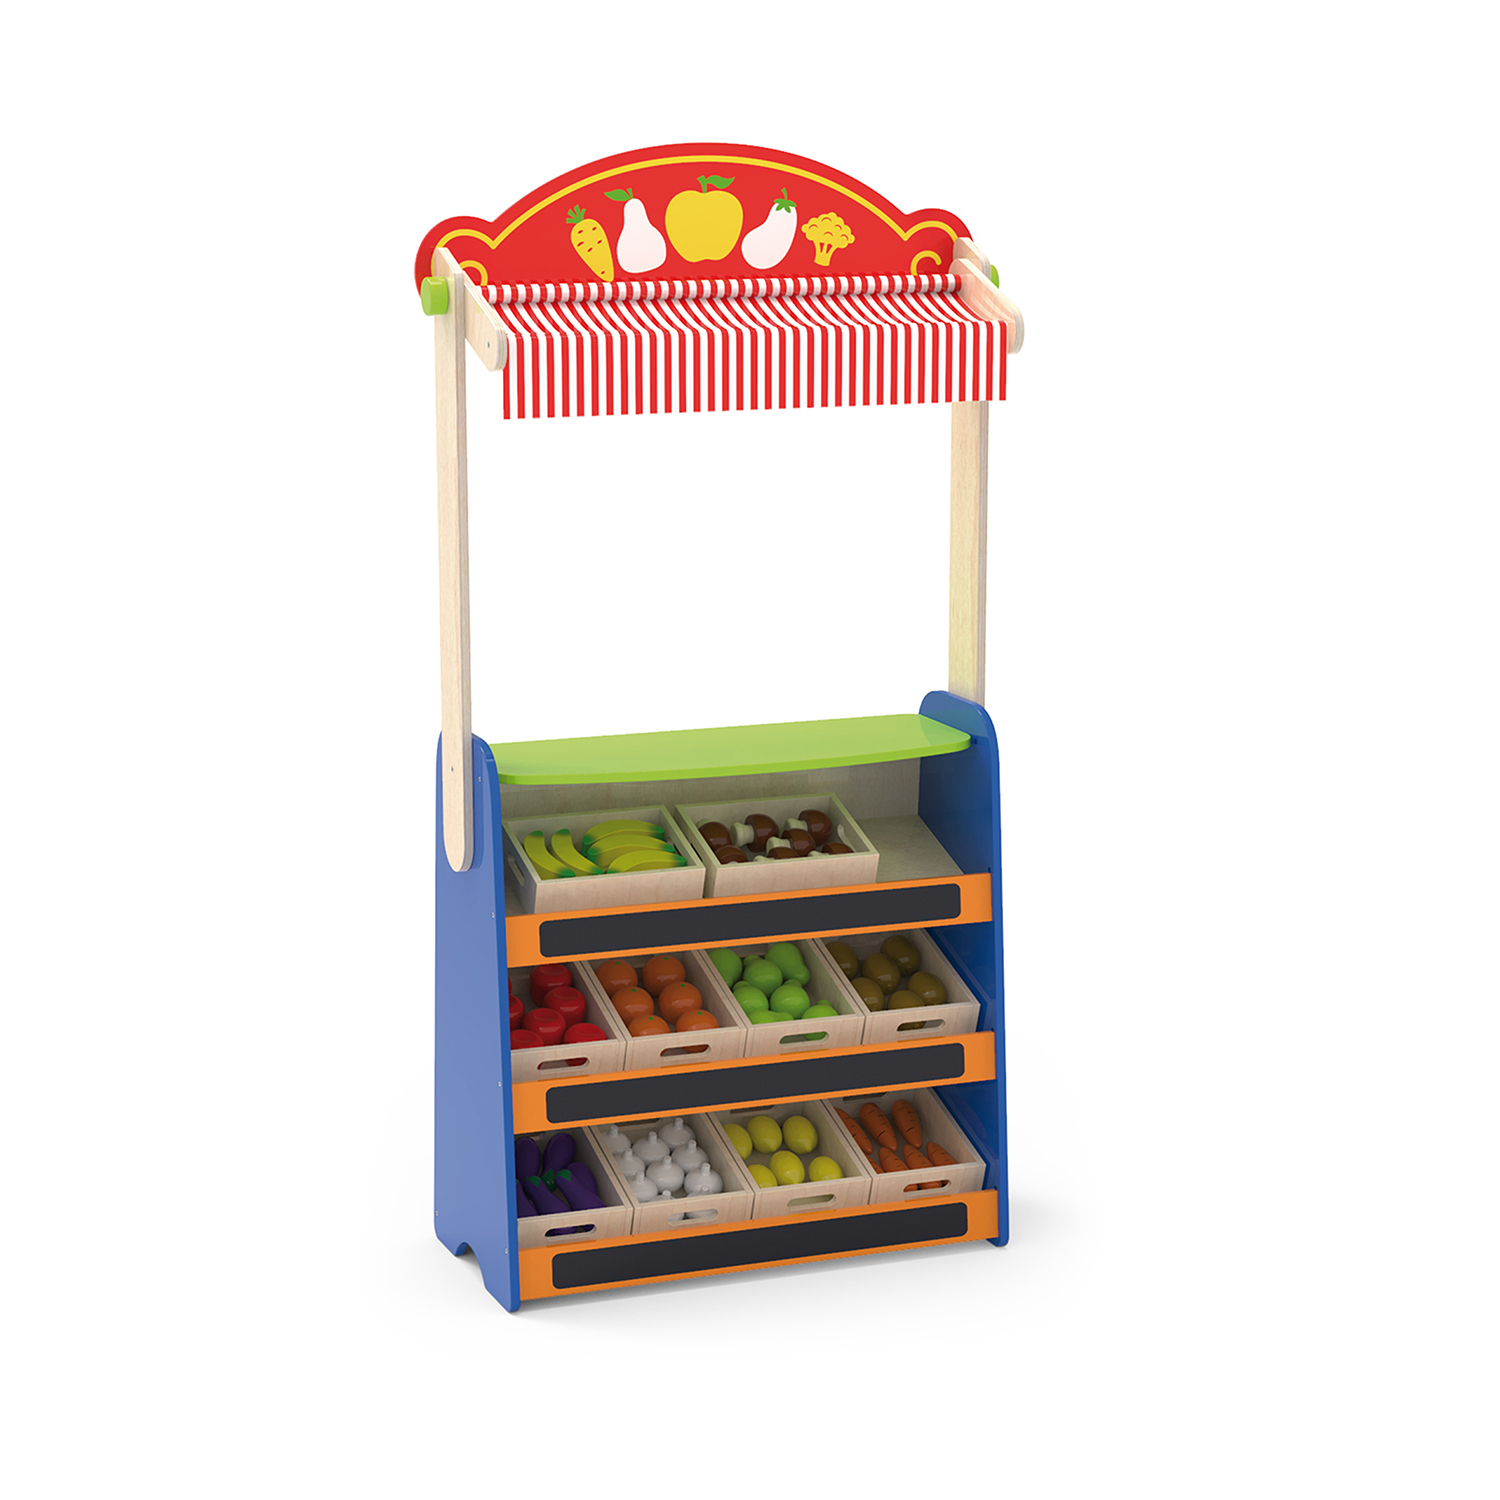 Wooden grocery stand containing wooden fruit and vegetables